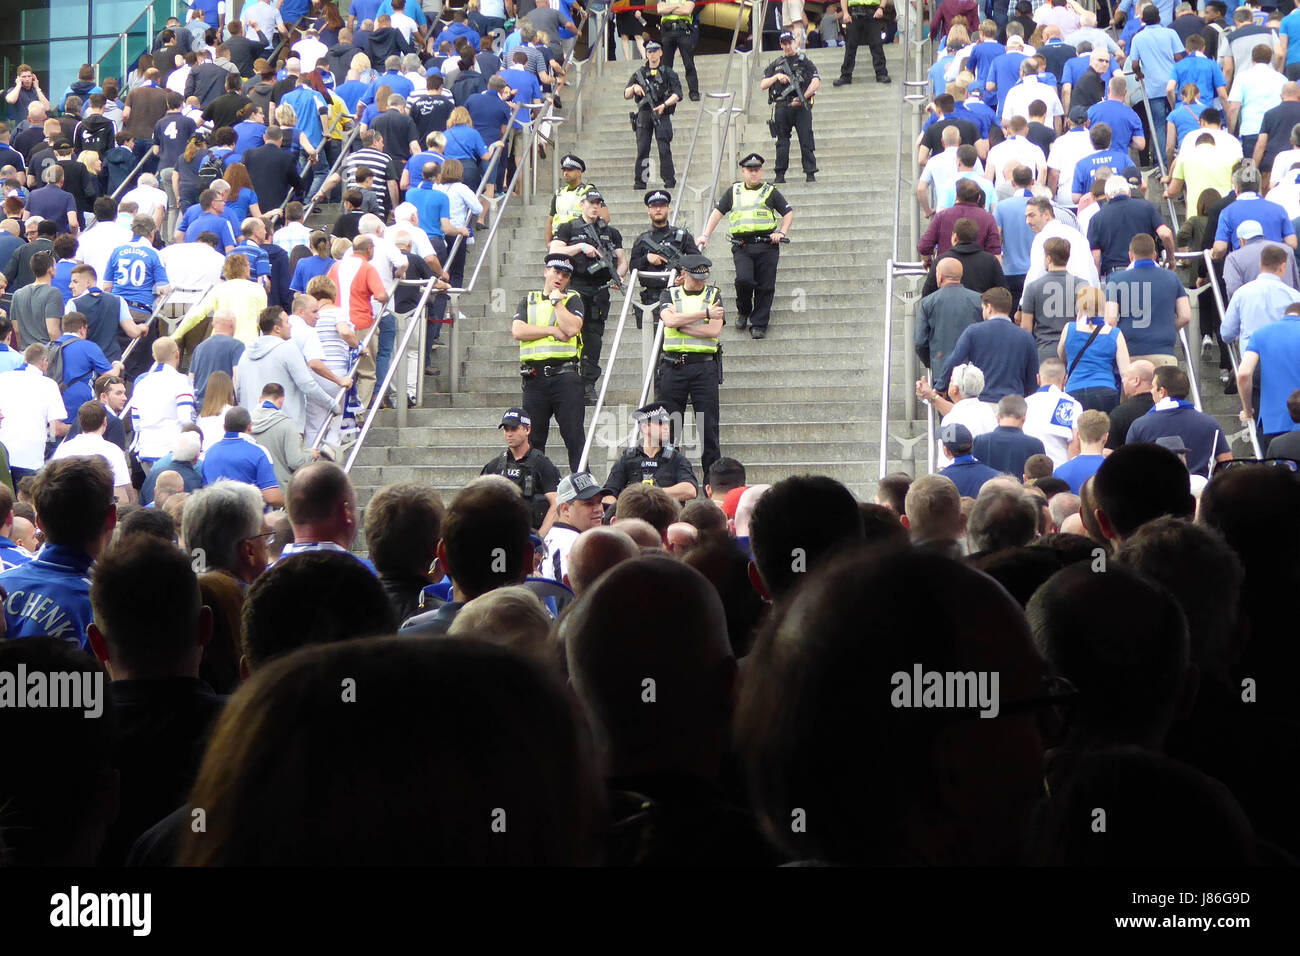 London, UK. 27th May, 2017. Police and armed police watch over FA Cup final fans at Wembley London Credit: Nigel Bowles/Alamy Live News Stock Photo